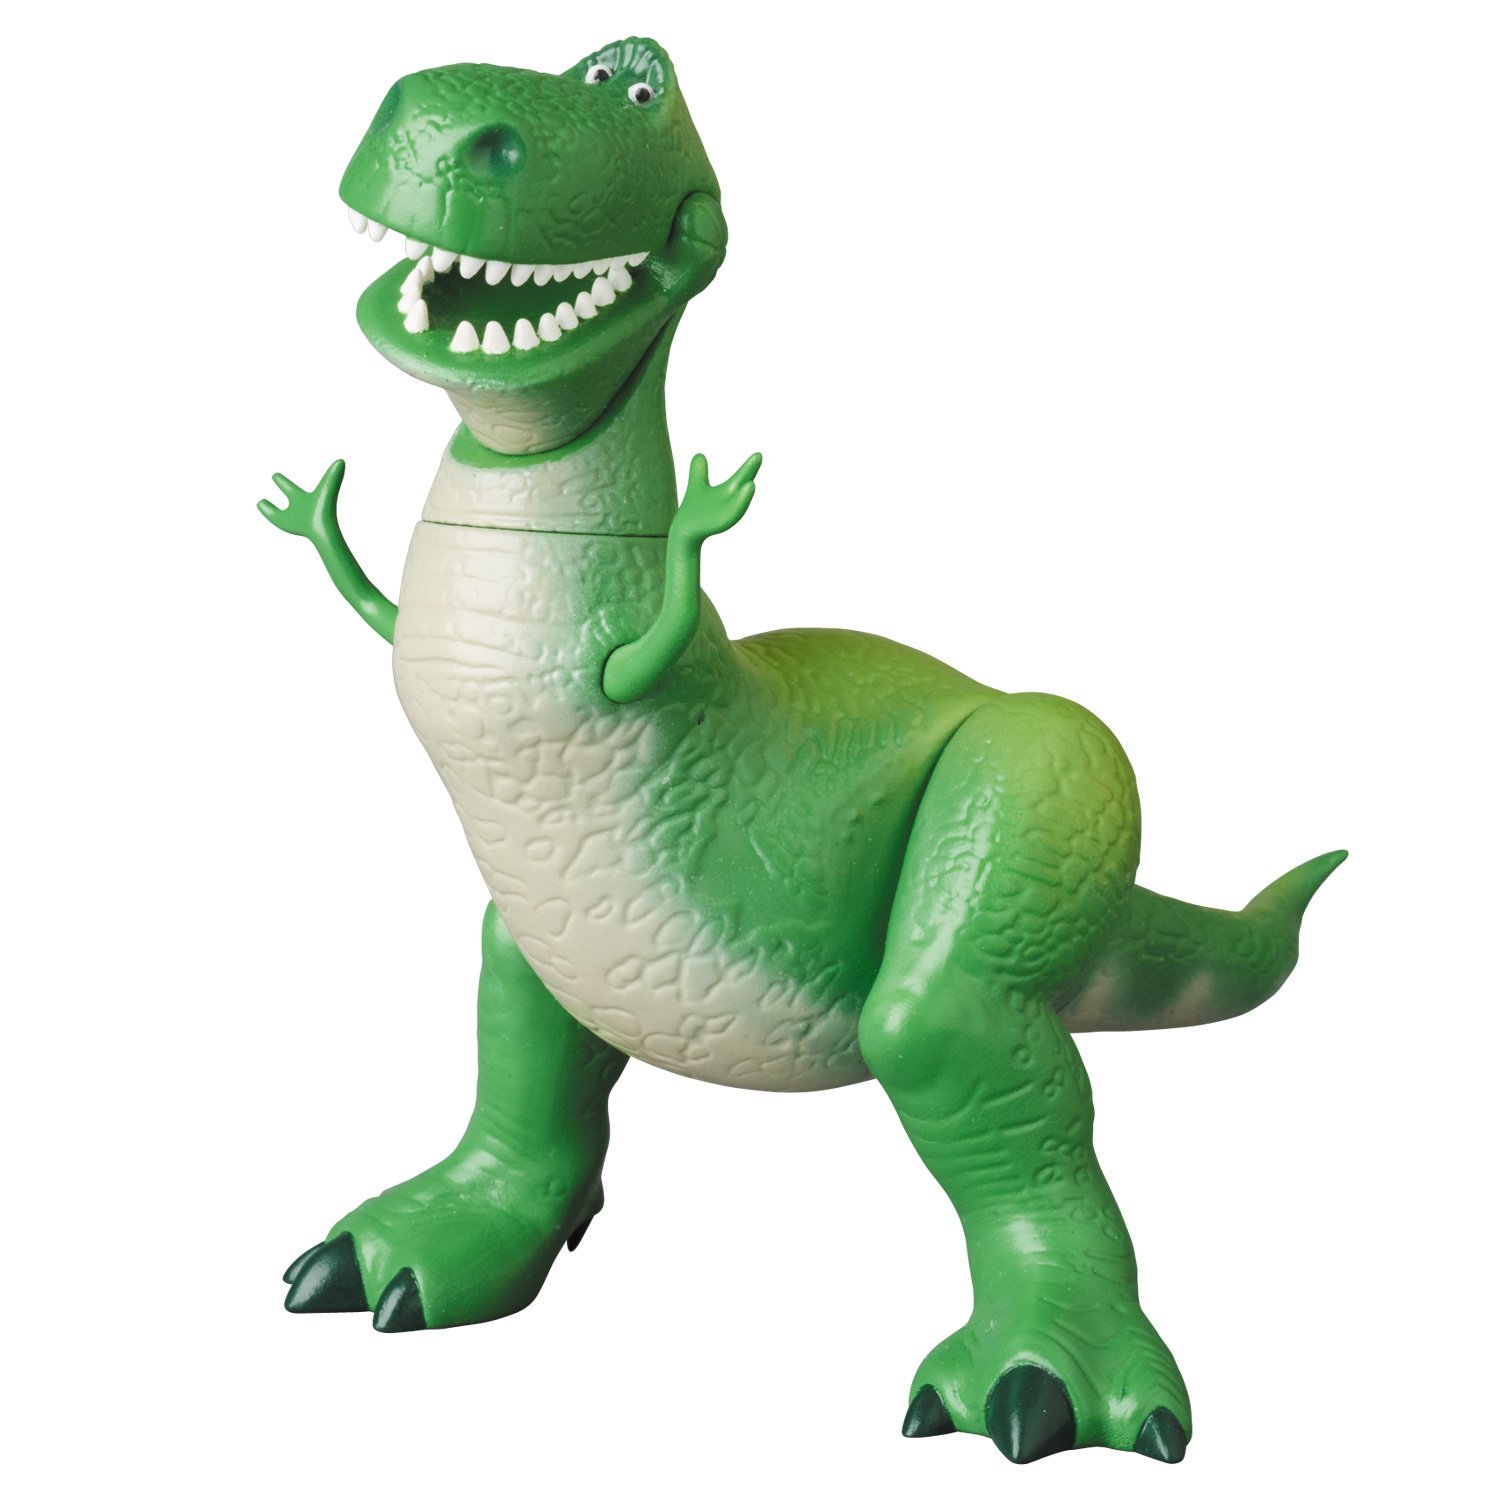 UDF (urutoradyite Rufigyua) Pixar Series 2 Rex Toy Story NON Scale PVC Painted Finished Product: Buy Online At Best Price In UAE